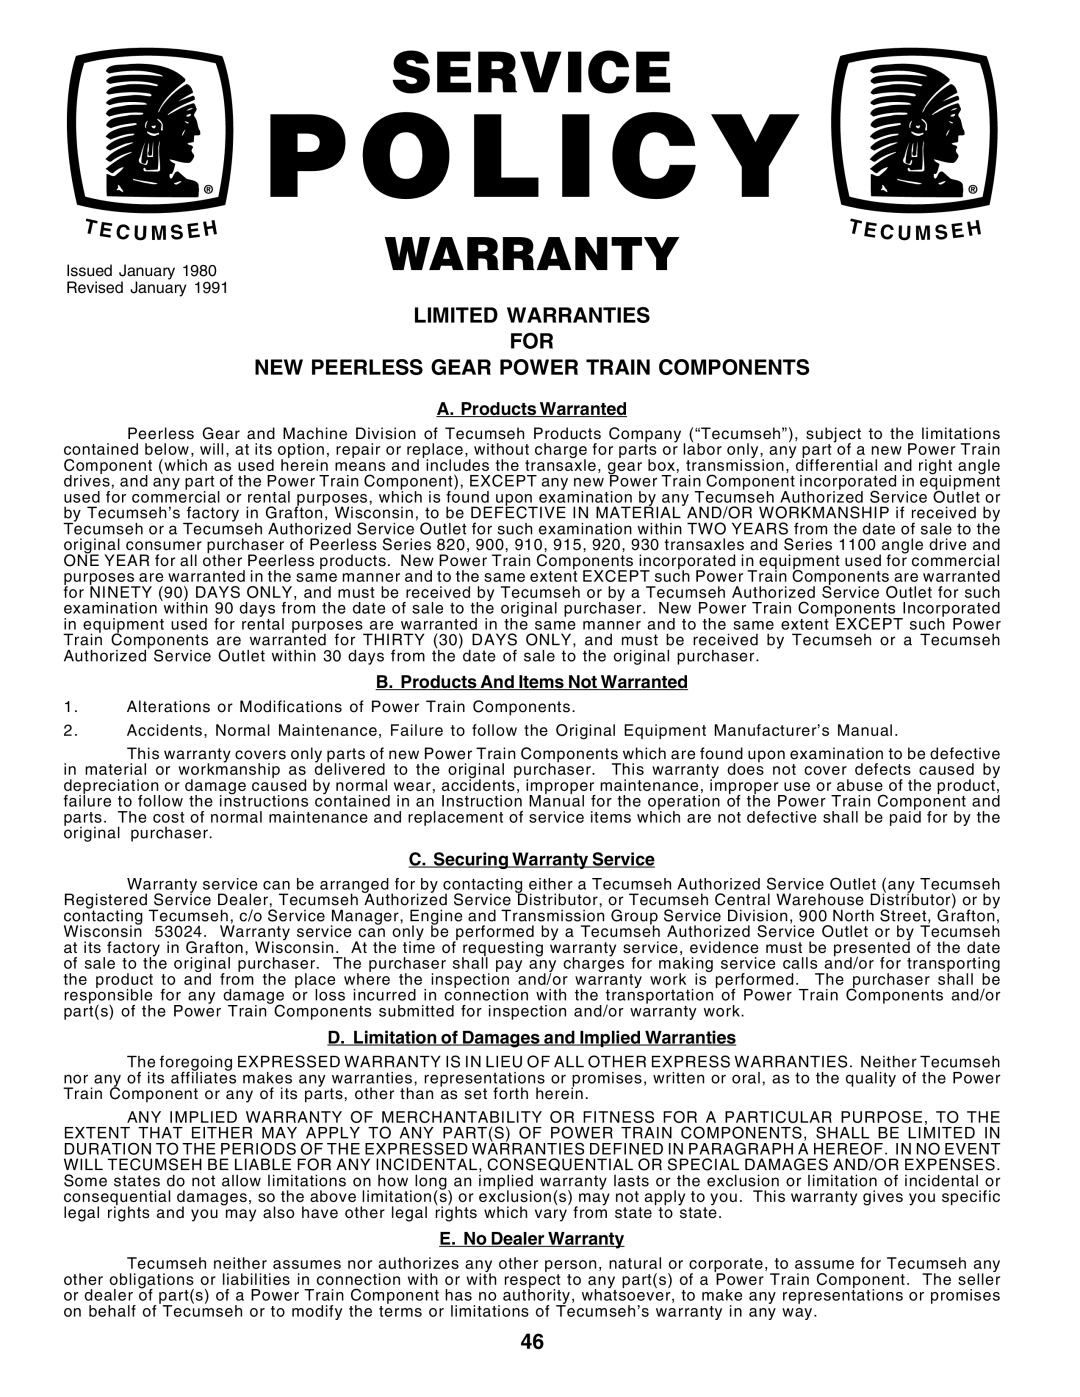 Poulan 182946 Limited Warranties For, New Peerless Gear Power Train Components, Policy, Service, Warranty, T E C U M Seh 